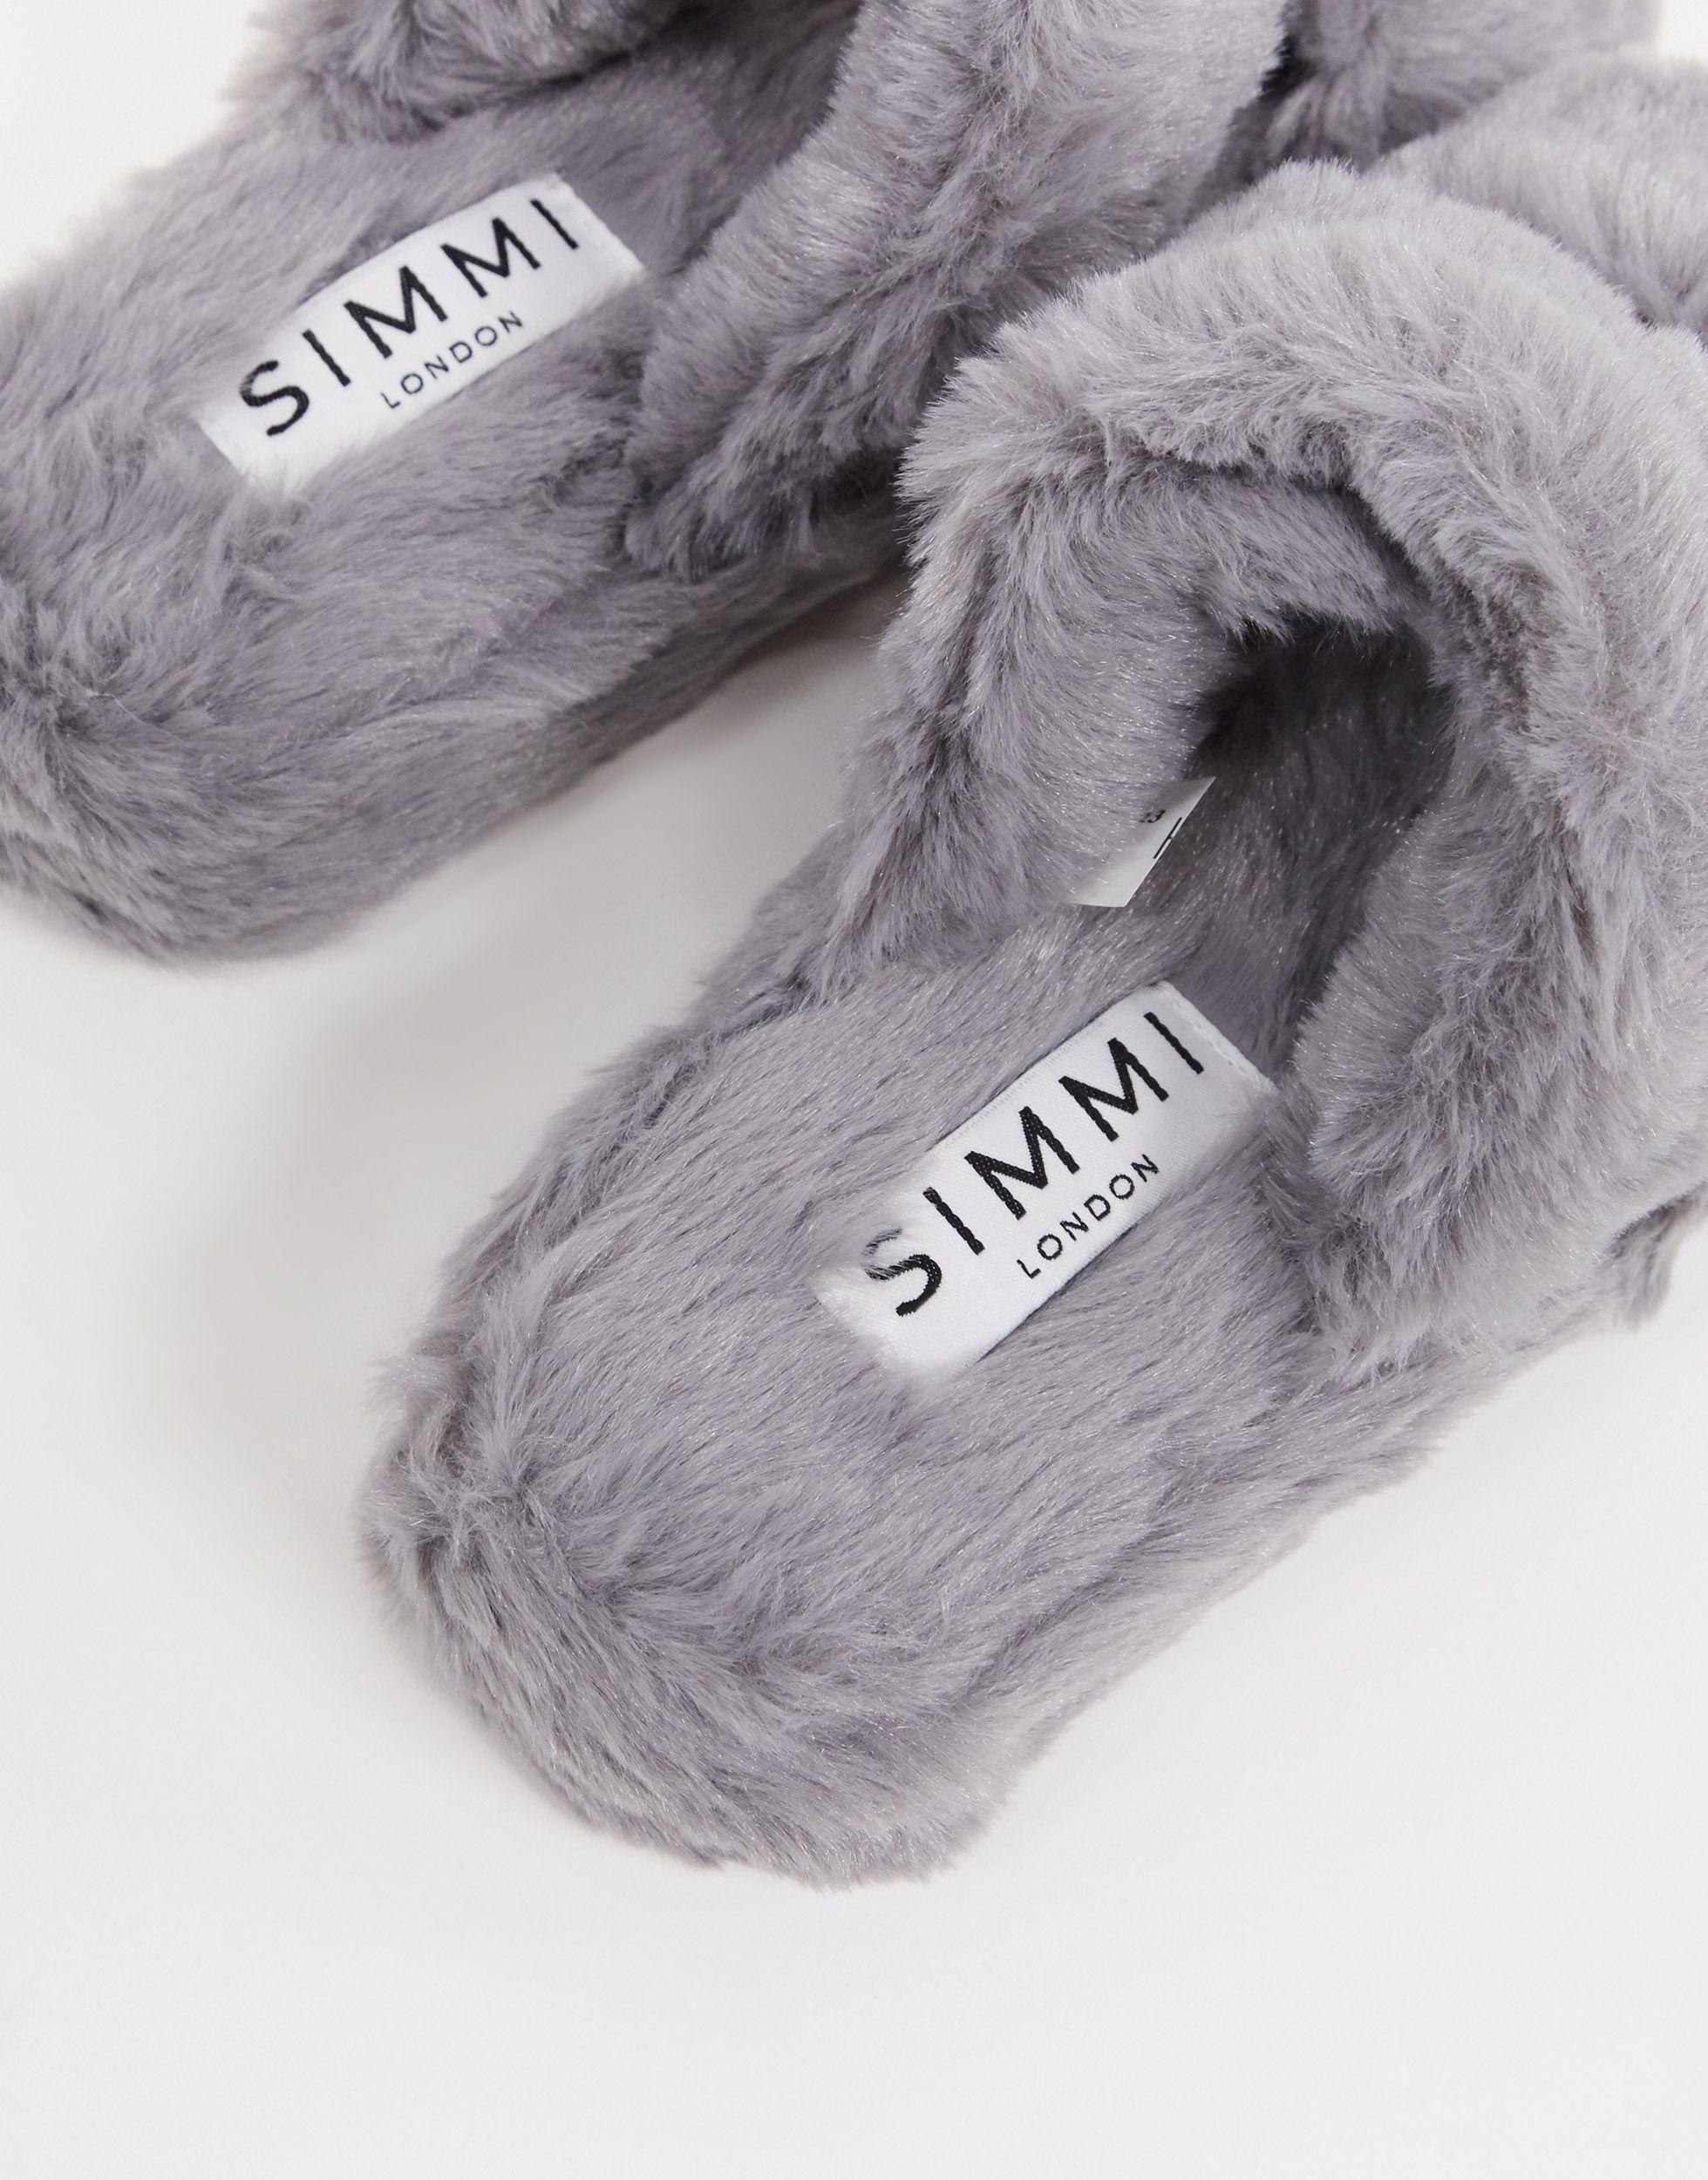 SIMMI Shoes Simmi London Fluffy Slippers in Gray | Lyst